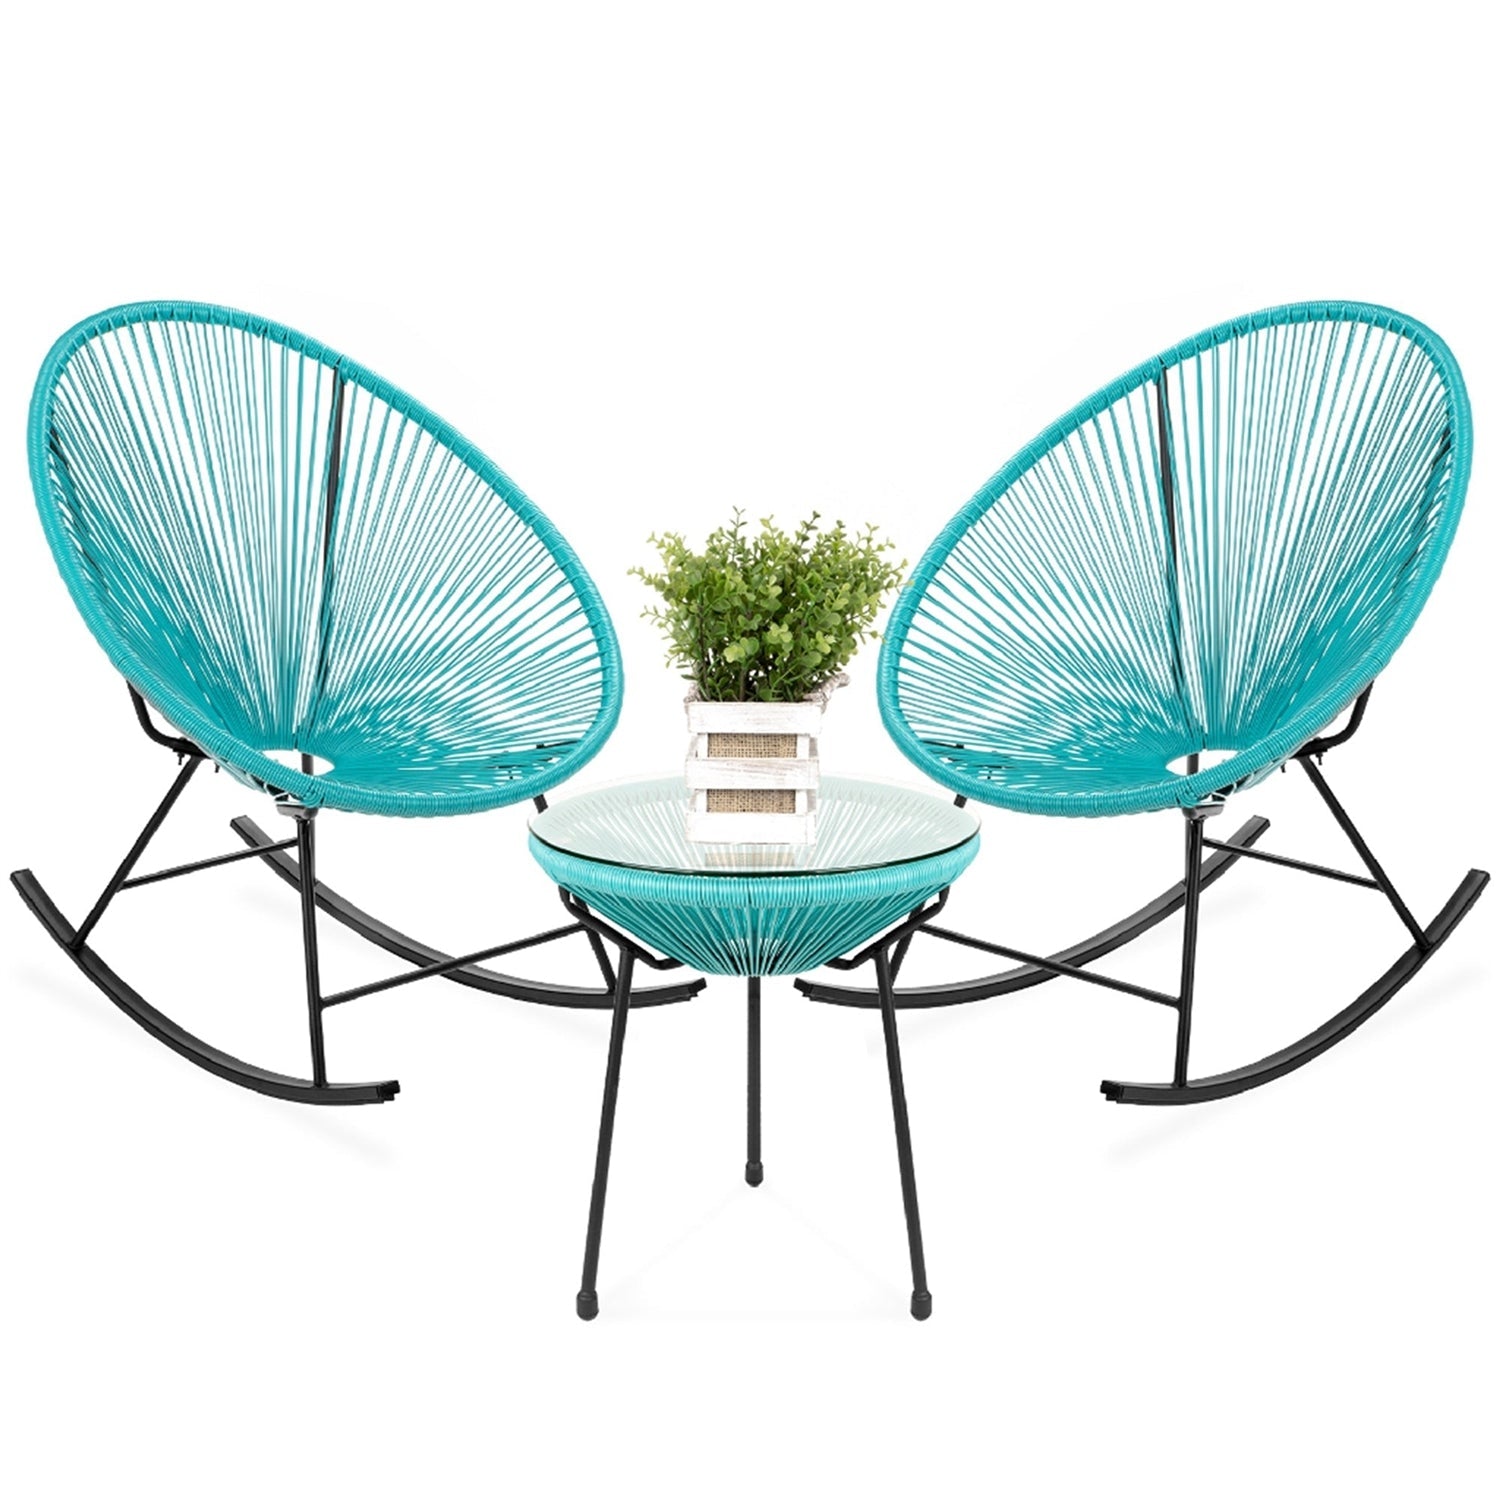 3 Piece Teal Oval Patio Woven Rocking Chair Bistro Set